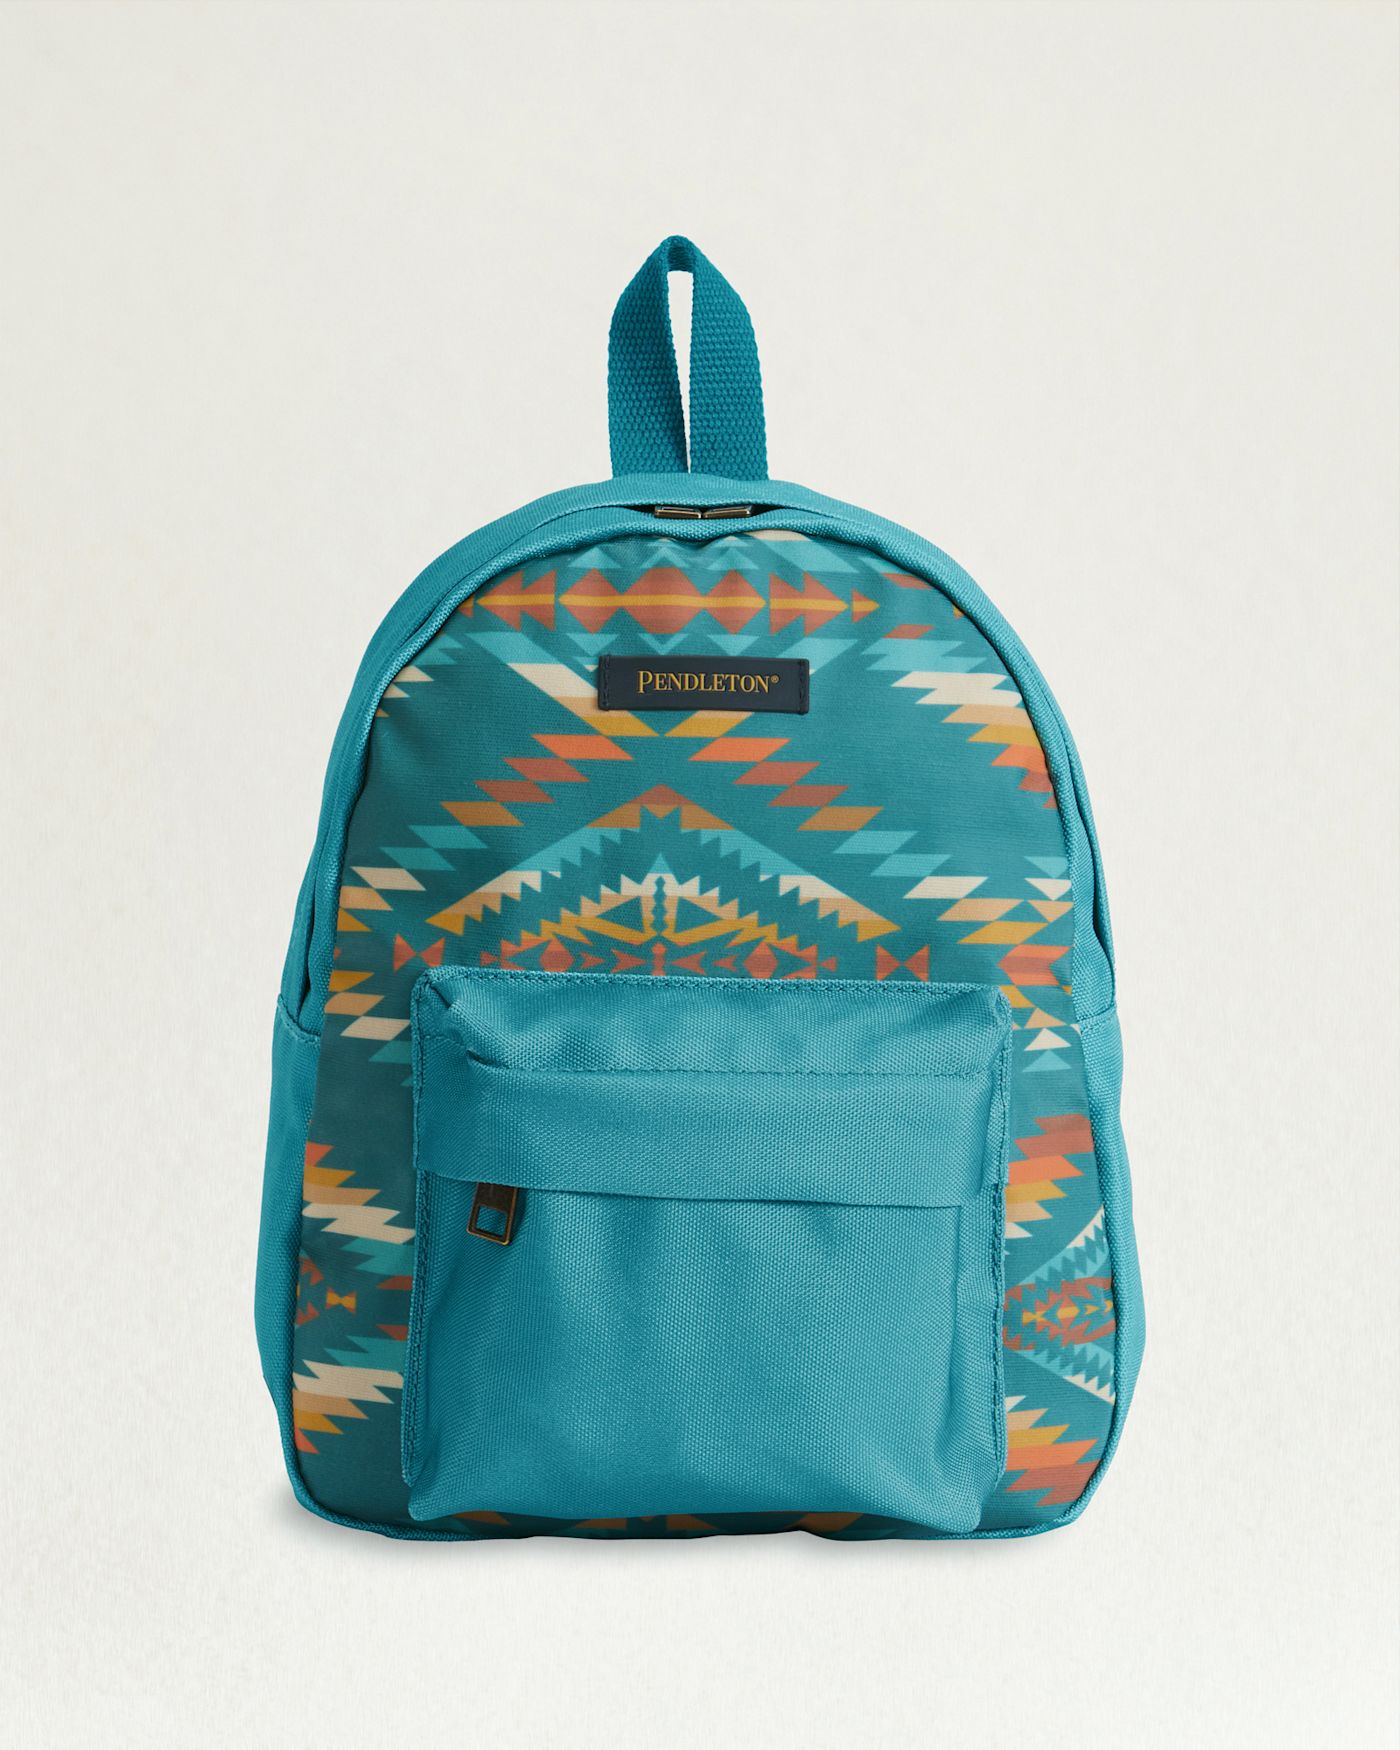 SUMMERLAND BRIGHT CANOPY CANVAS MINI BACKPACK